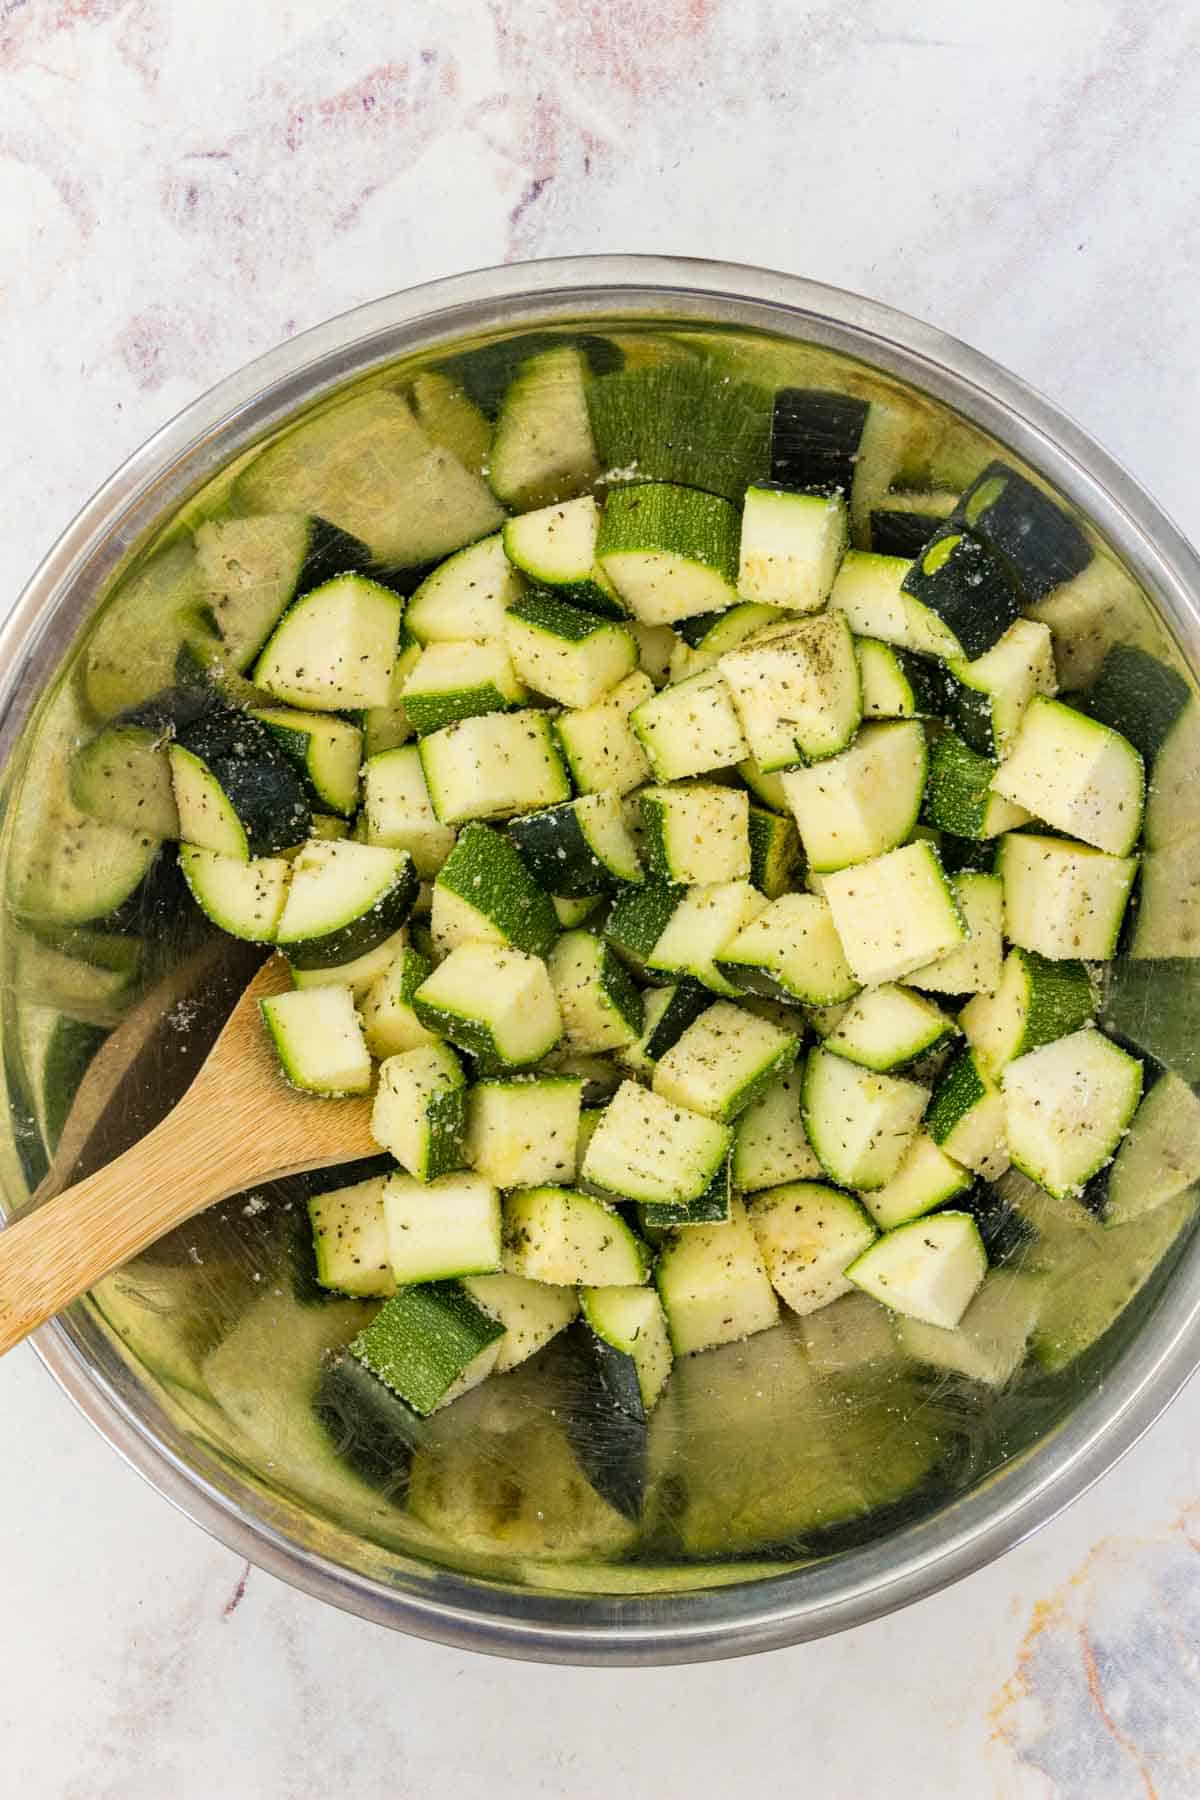 Zucchini is tossed in a coating of olive oil, parmesan, and seasoning in a mixing bowl.